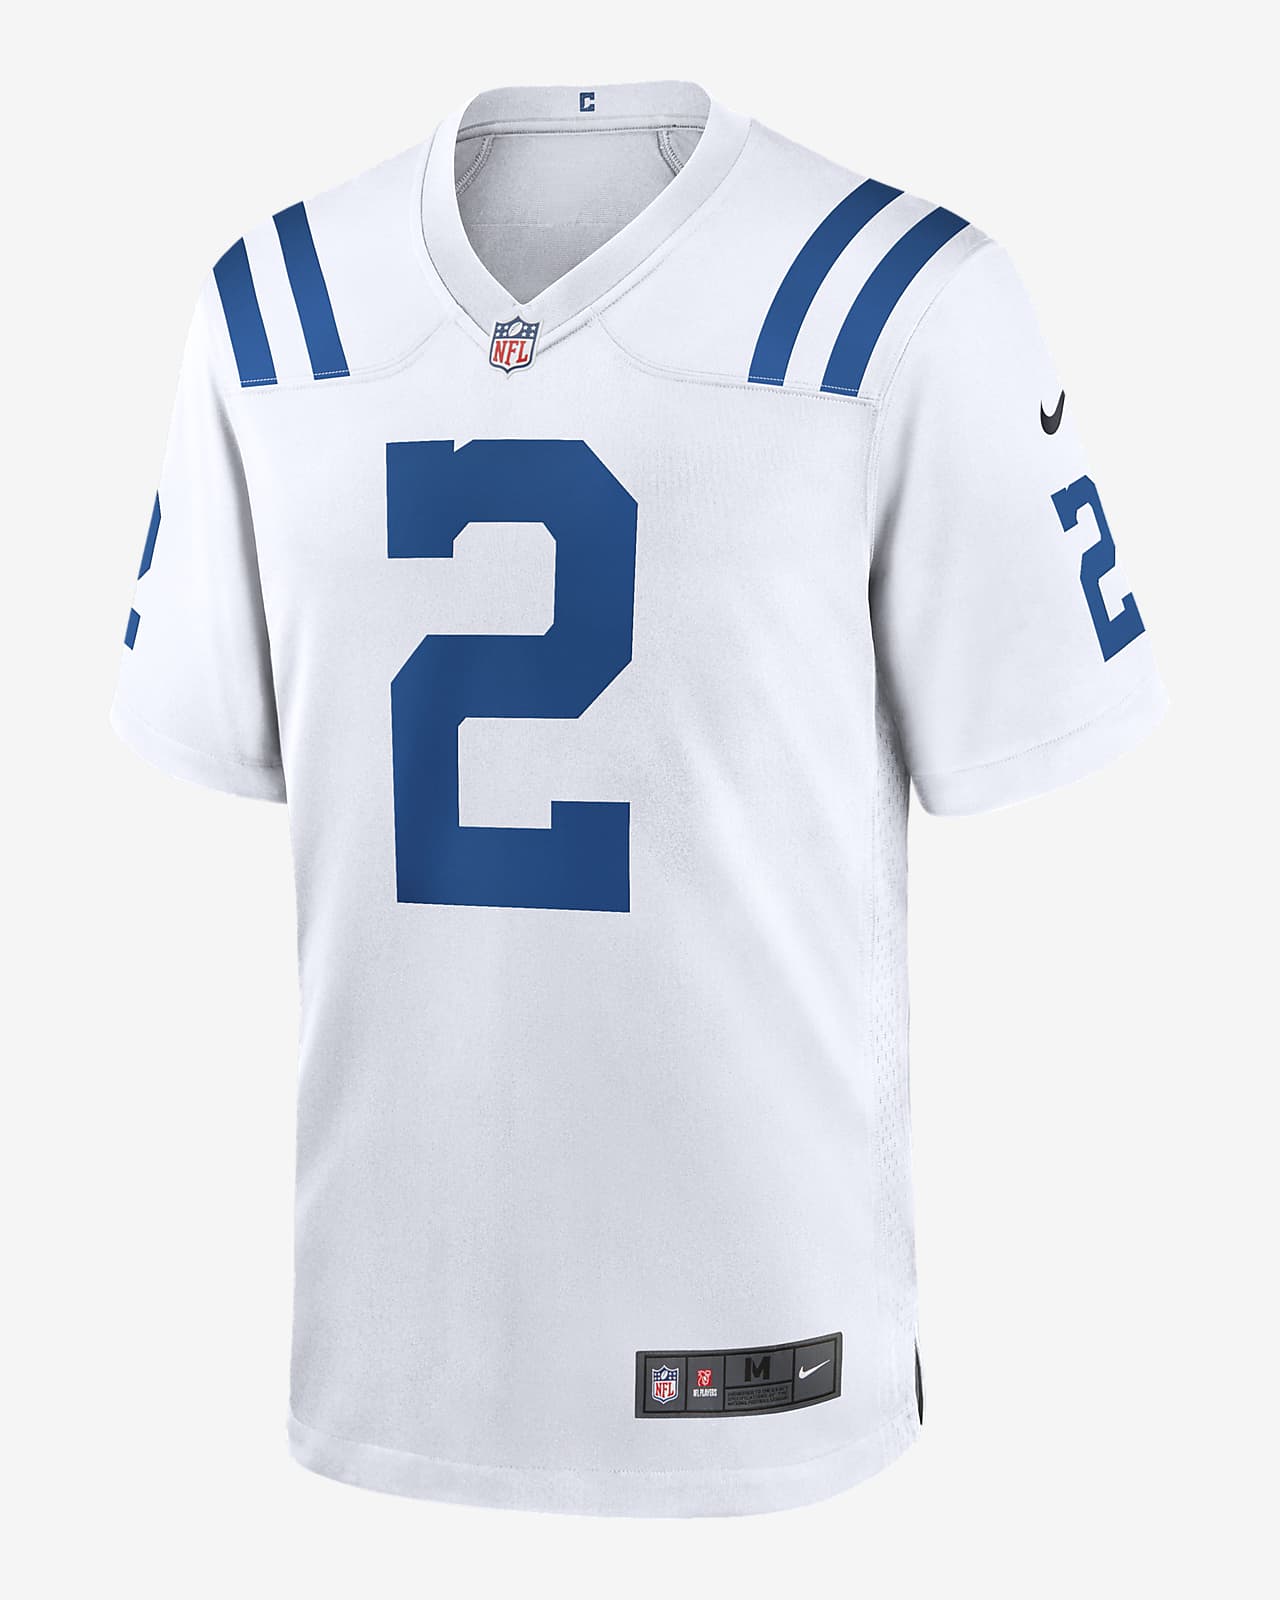 NFL Indianapolis Colts (Carson Wentz) Men's Game Football Jersey. Nike.com